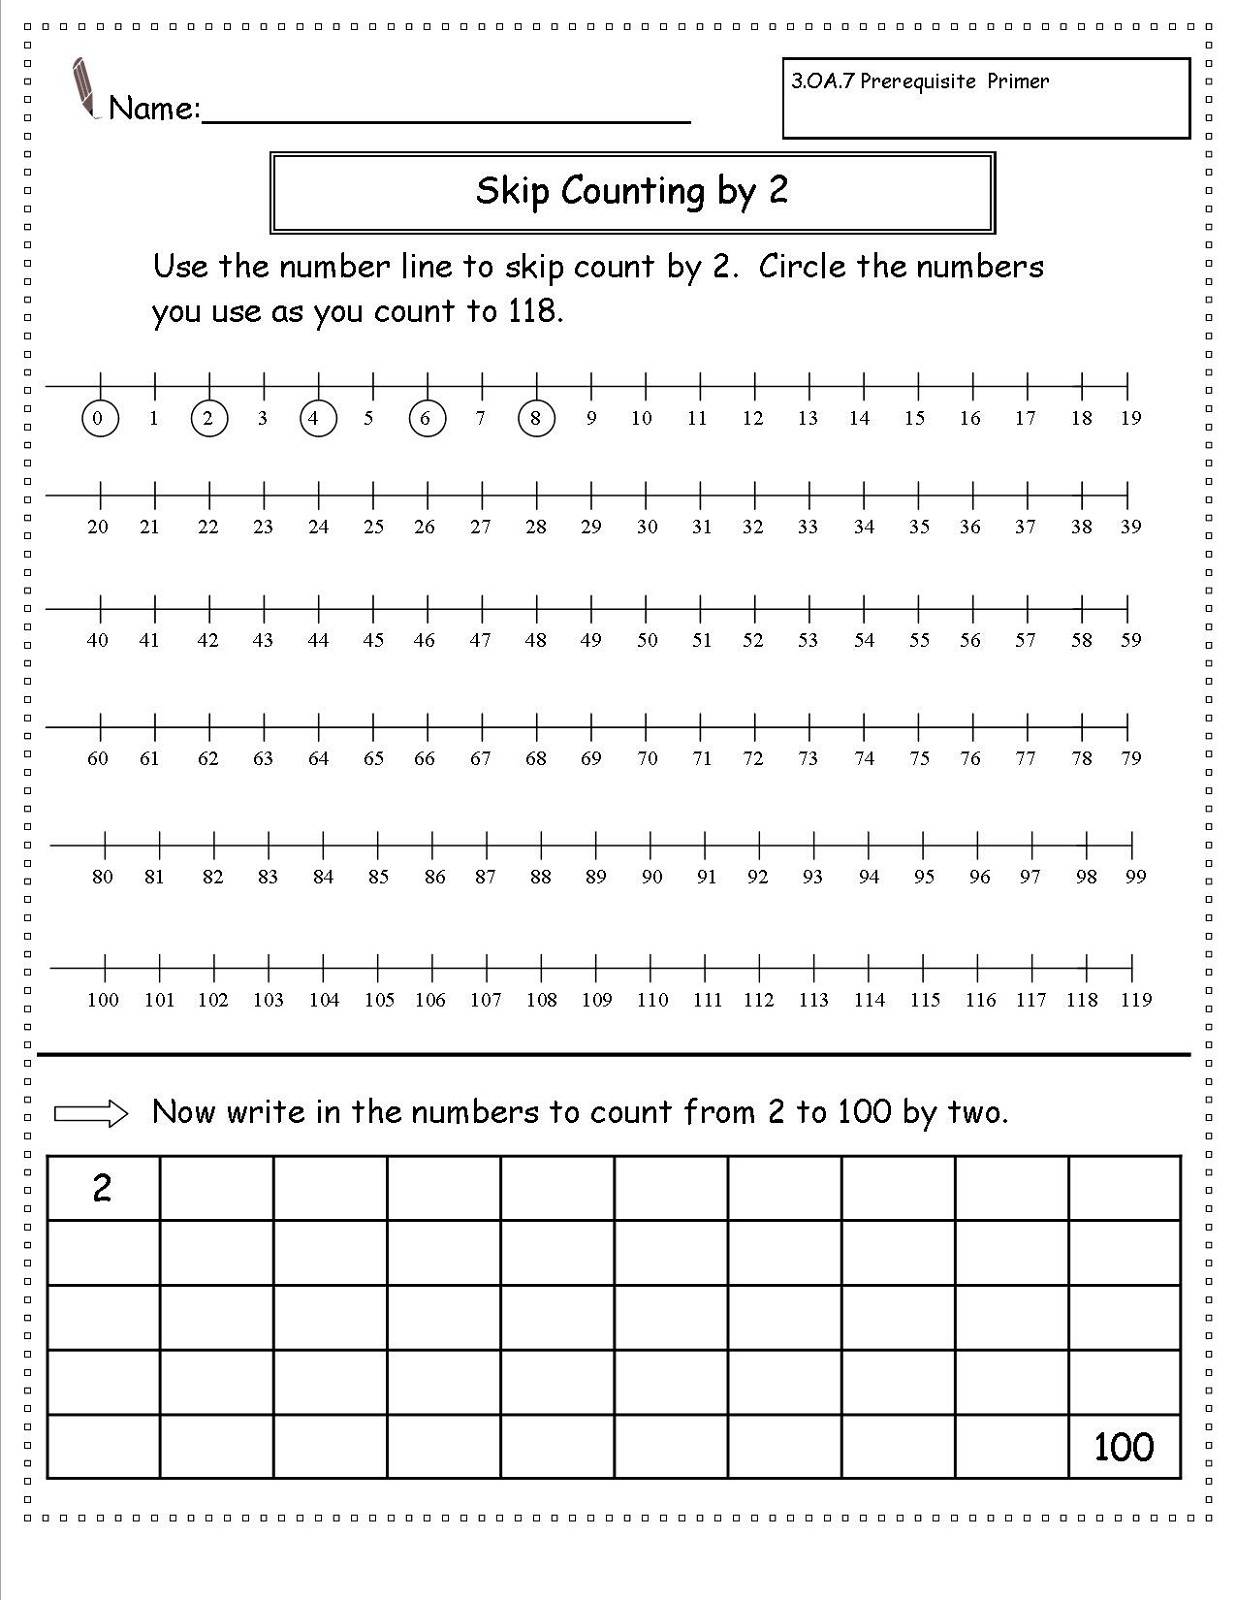 skip-count-by-2-worksheet-for-school